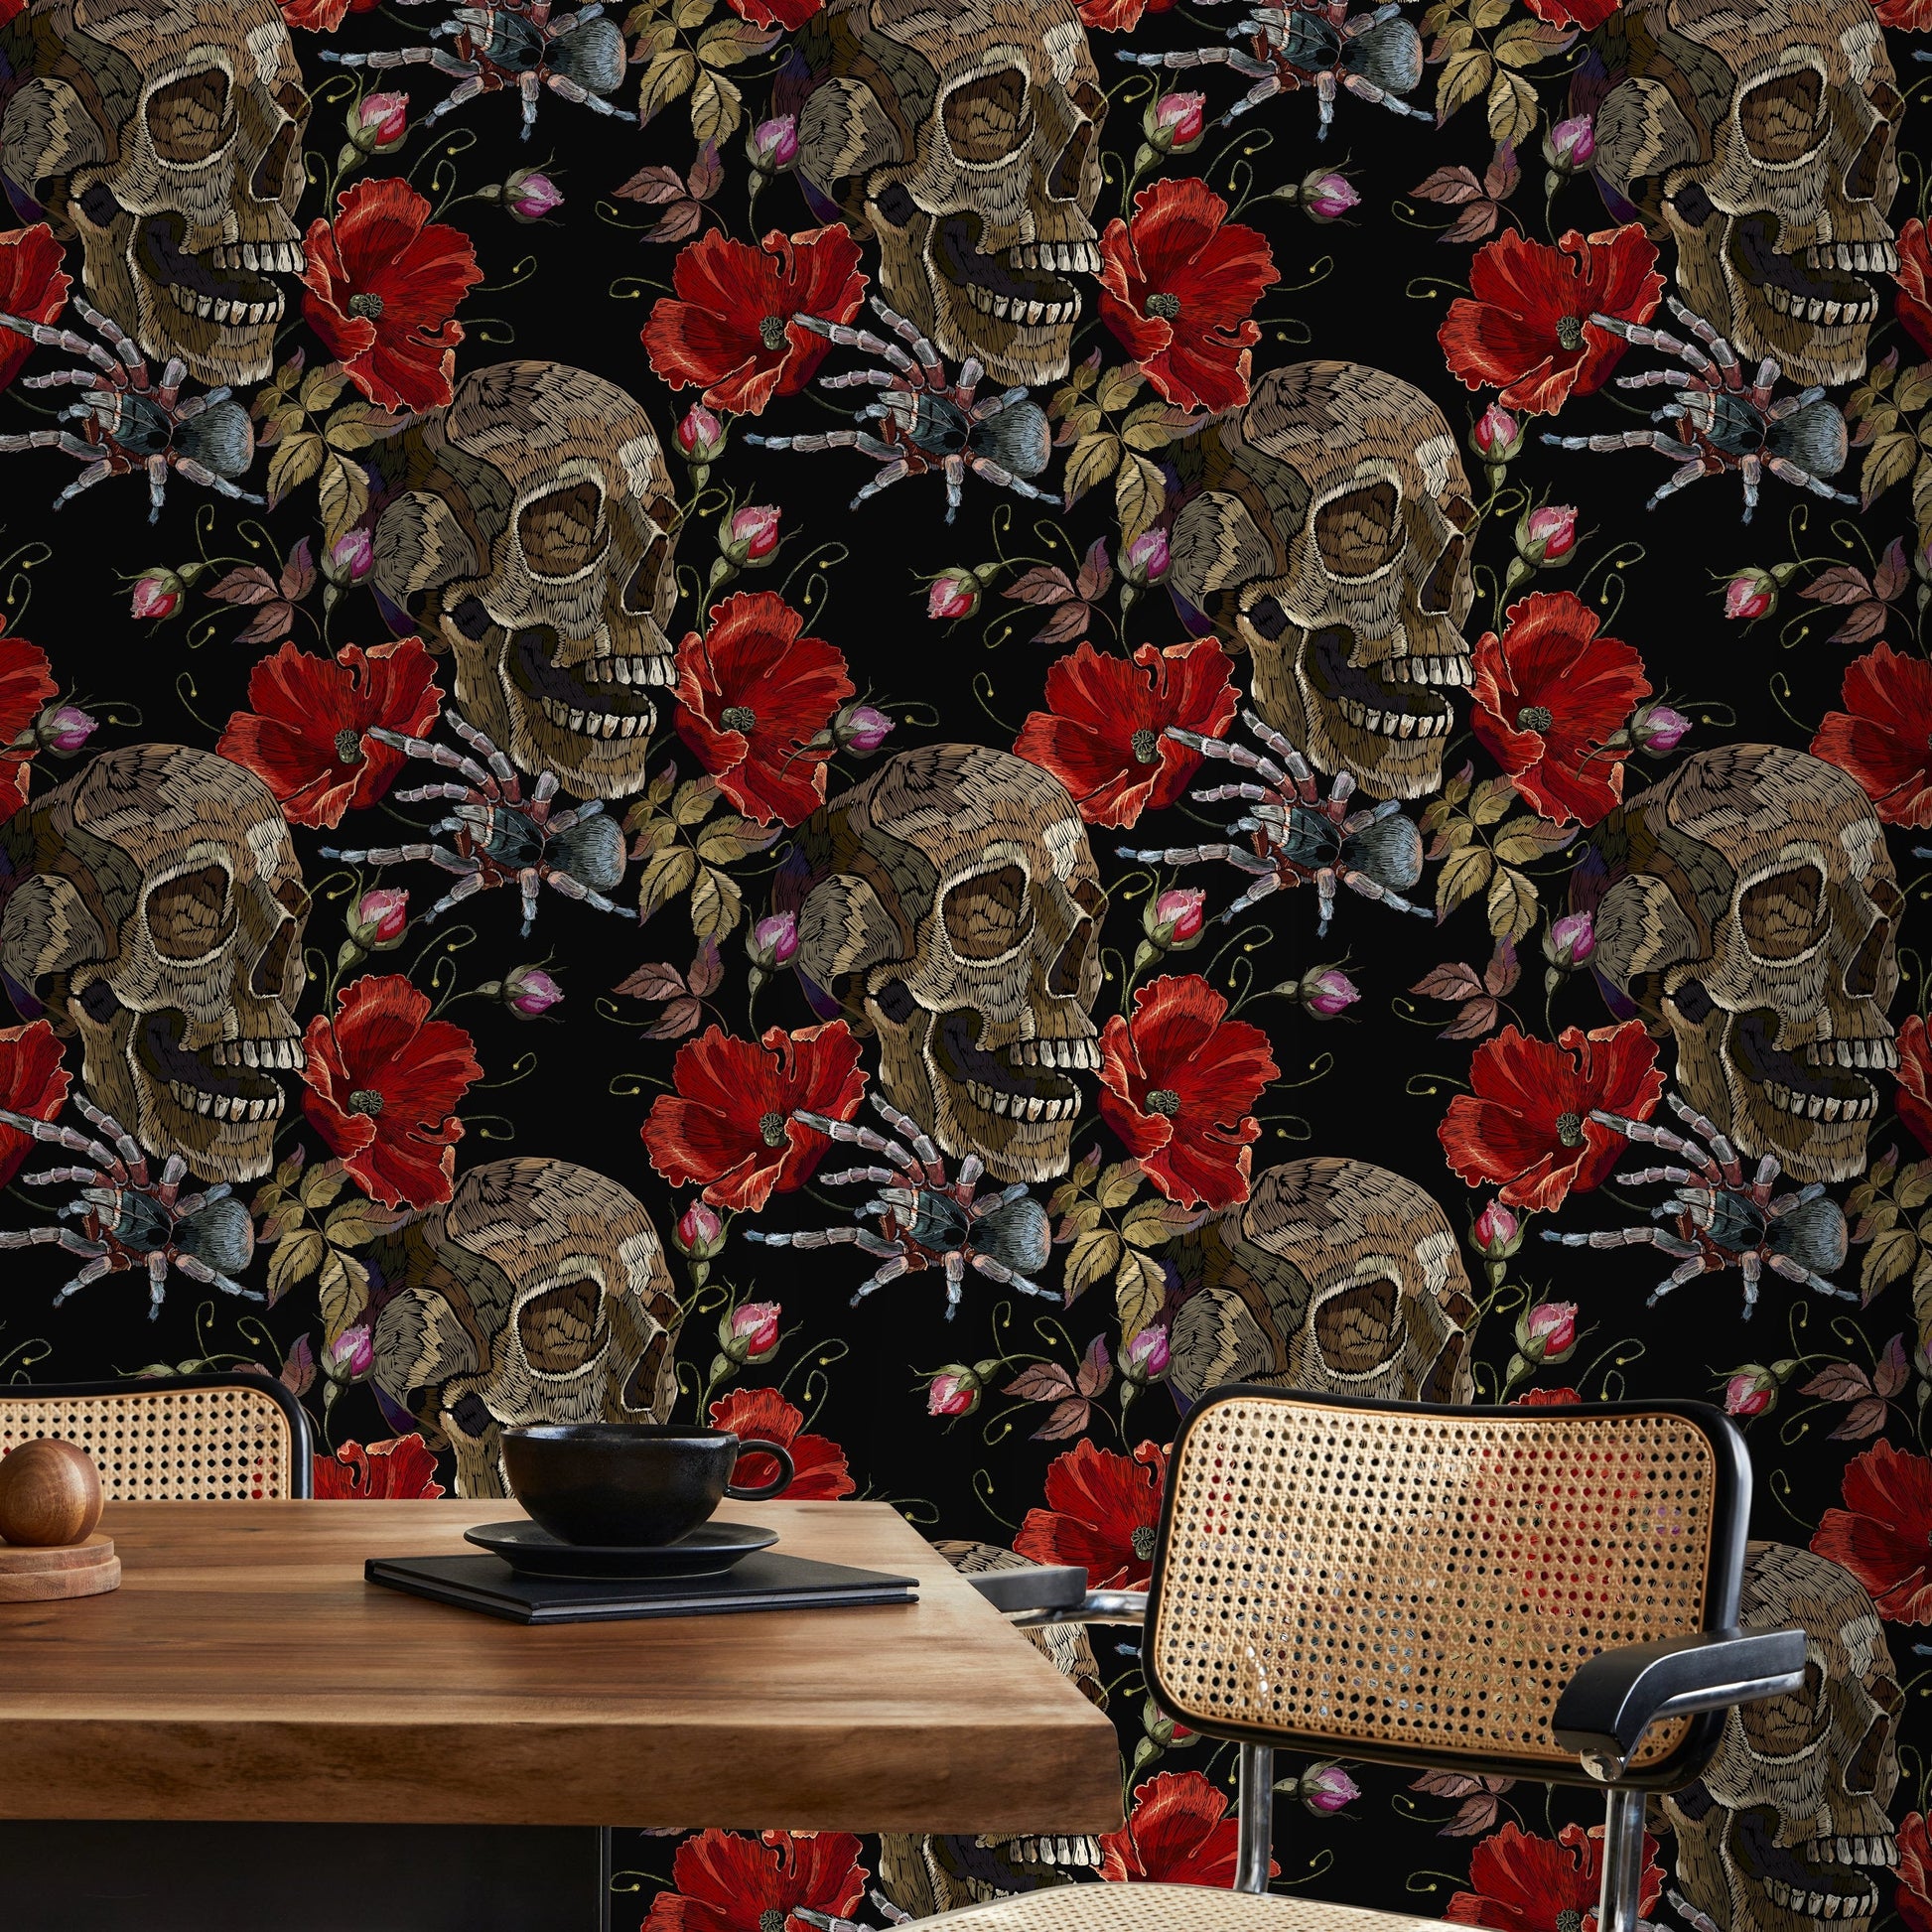 Dark Floral Wallpaper Spider and Skull Wallpaper Peel and Stick and Traditional Wallpaper - D916